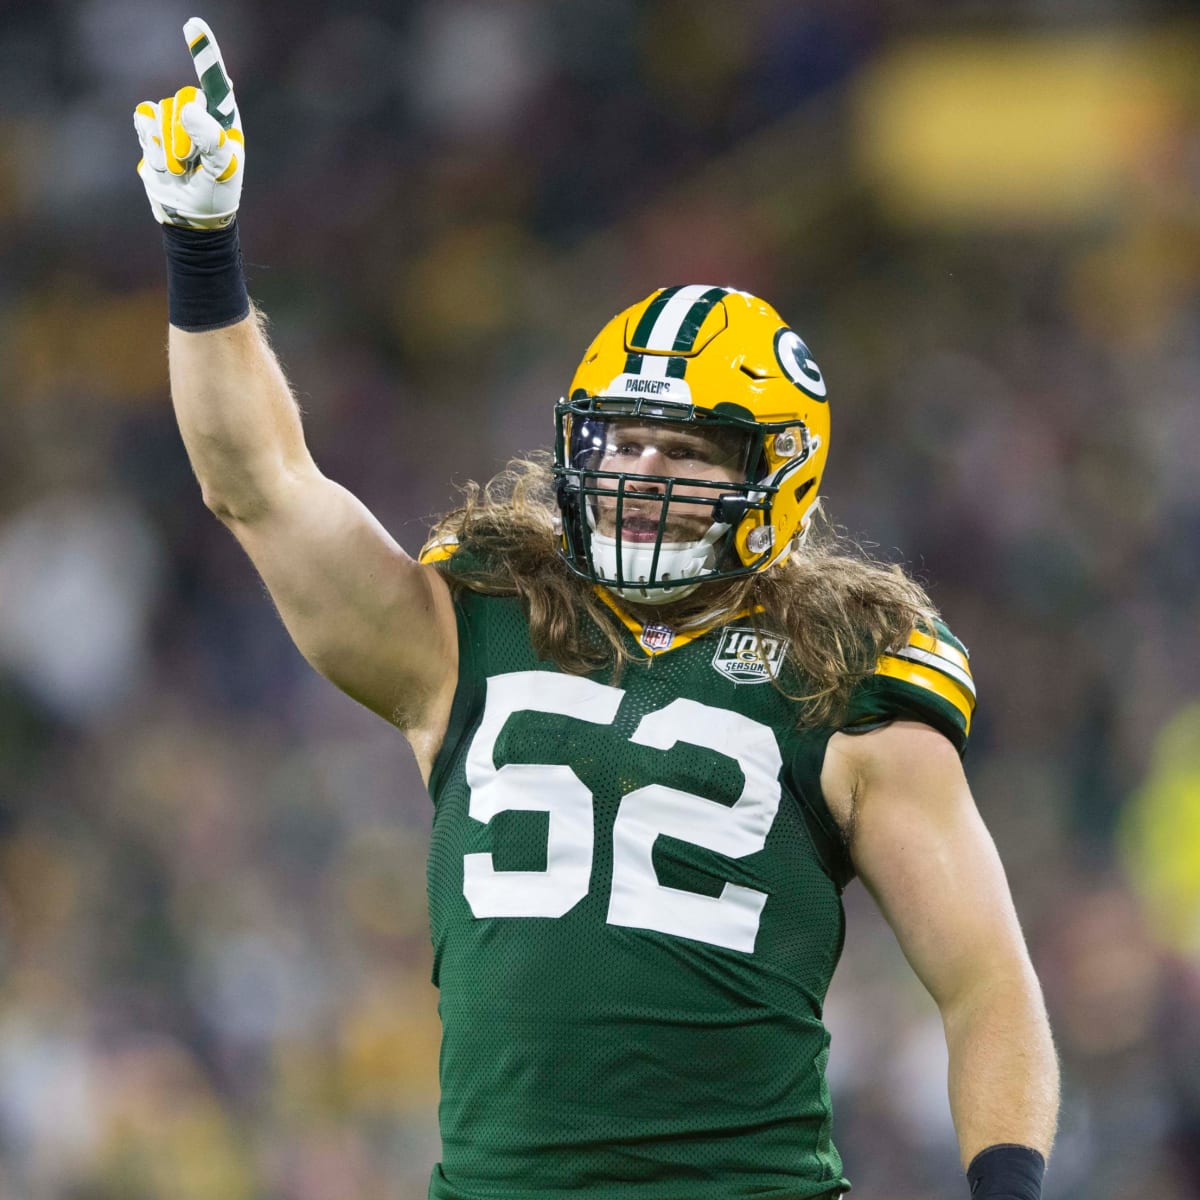 Its true, Clay Matthews is the Thor of the NFL